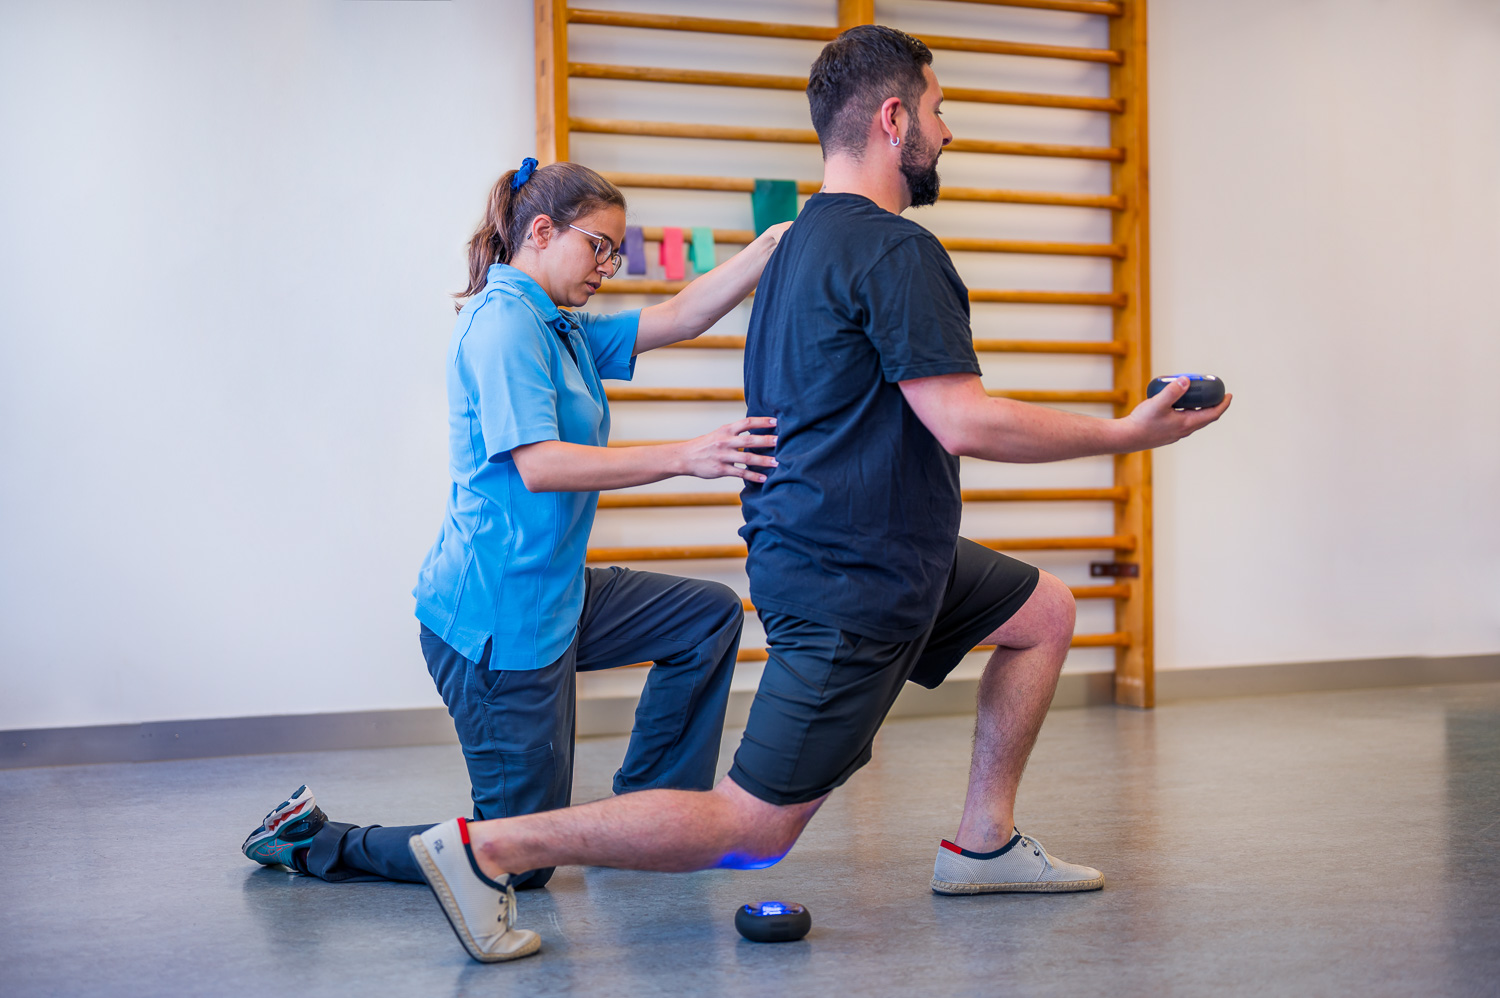 The physiotherapist pays attention to the correct posture of the patient during the lunge.